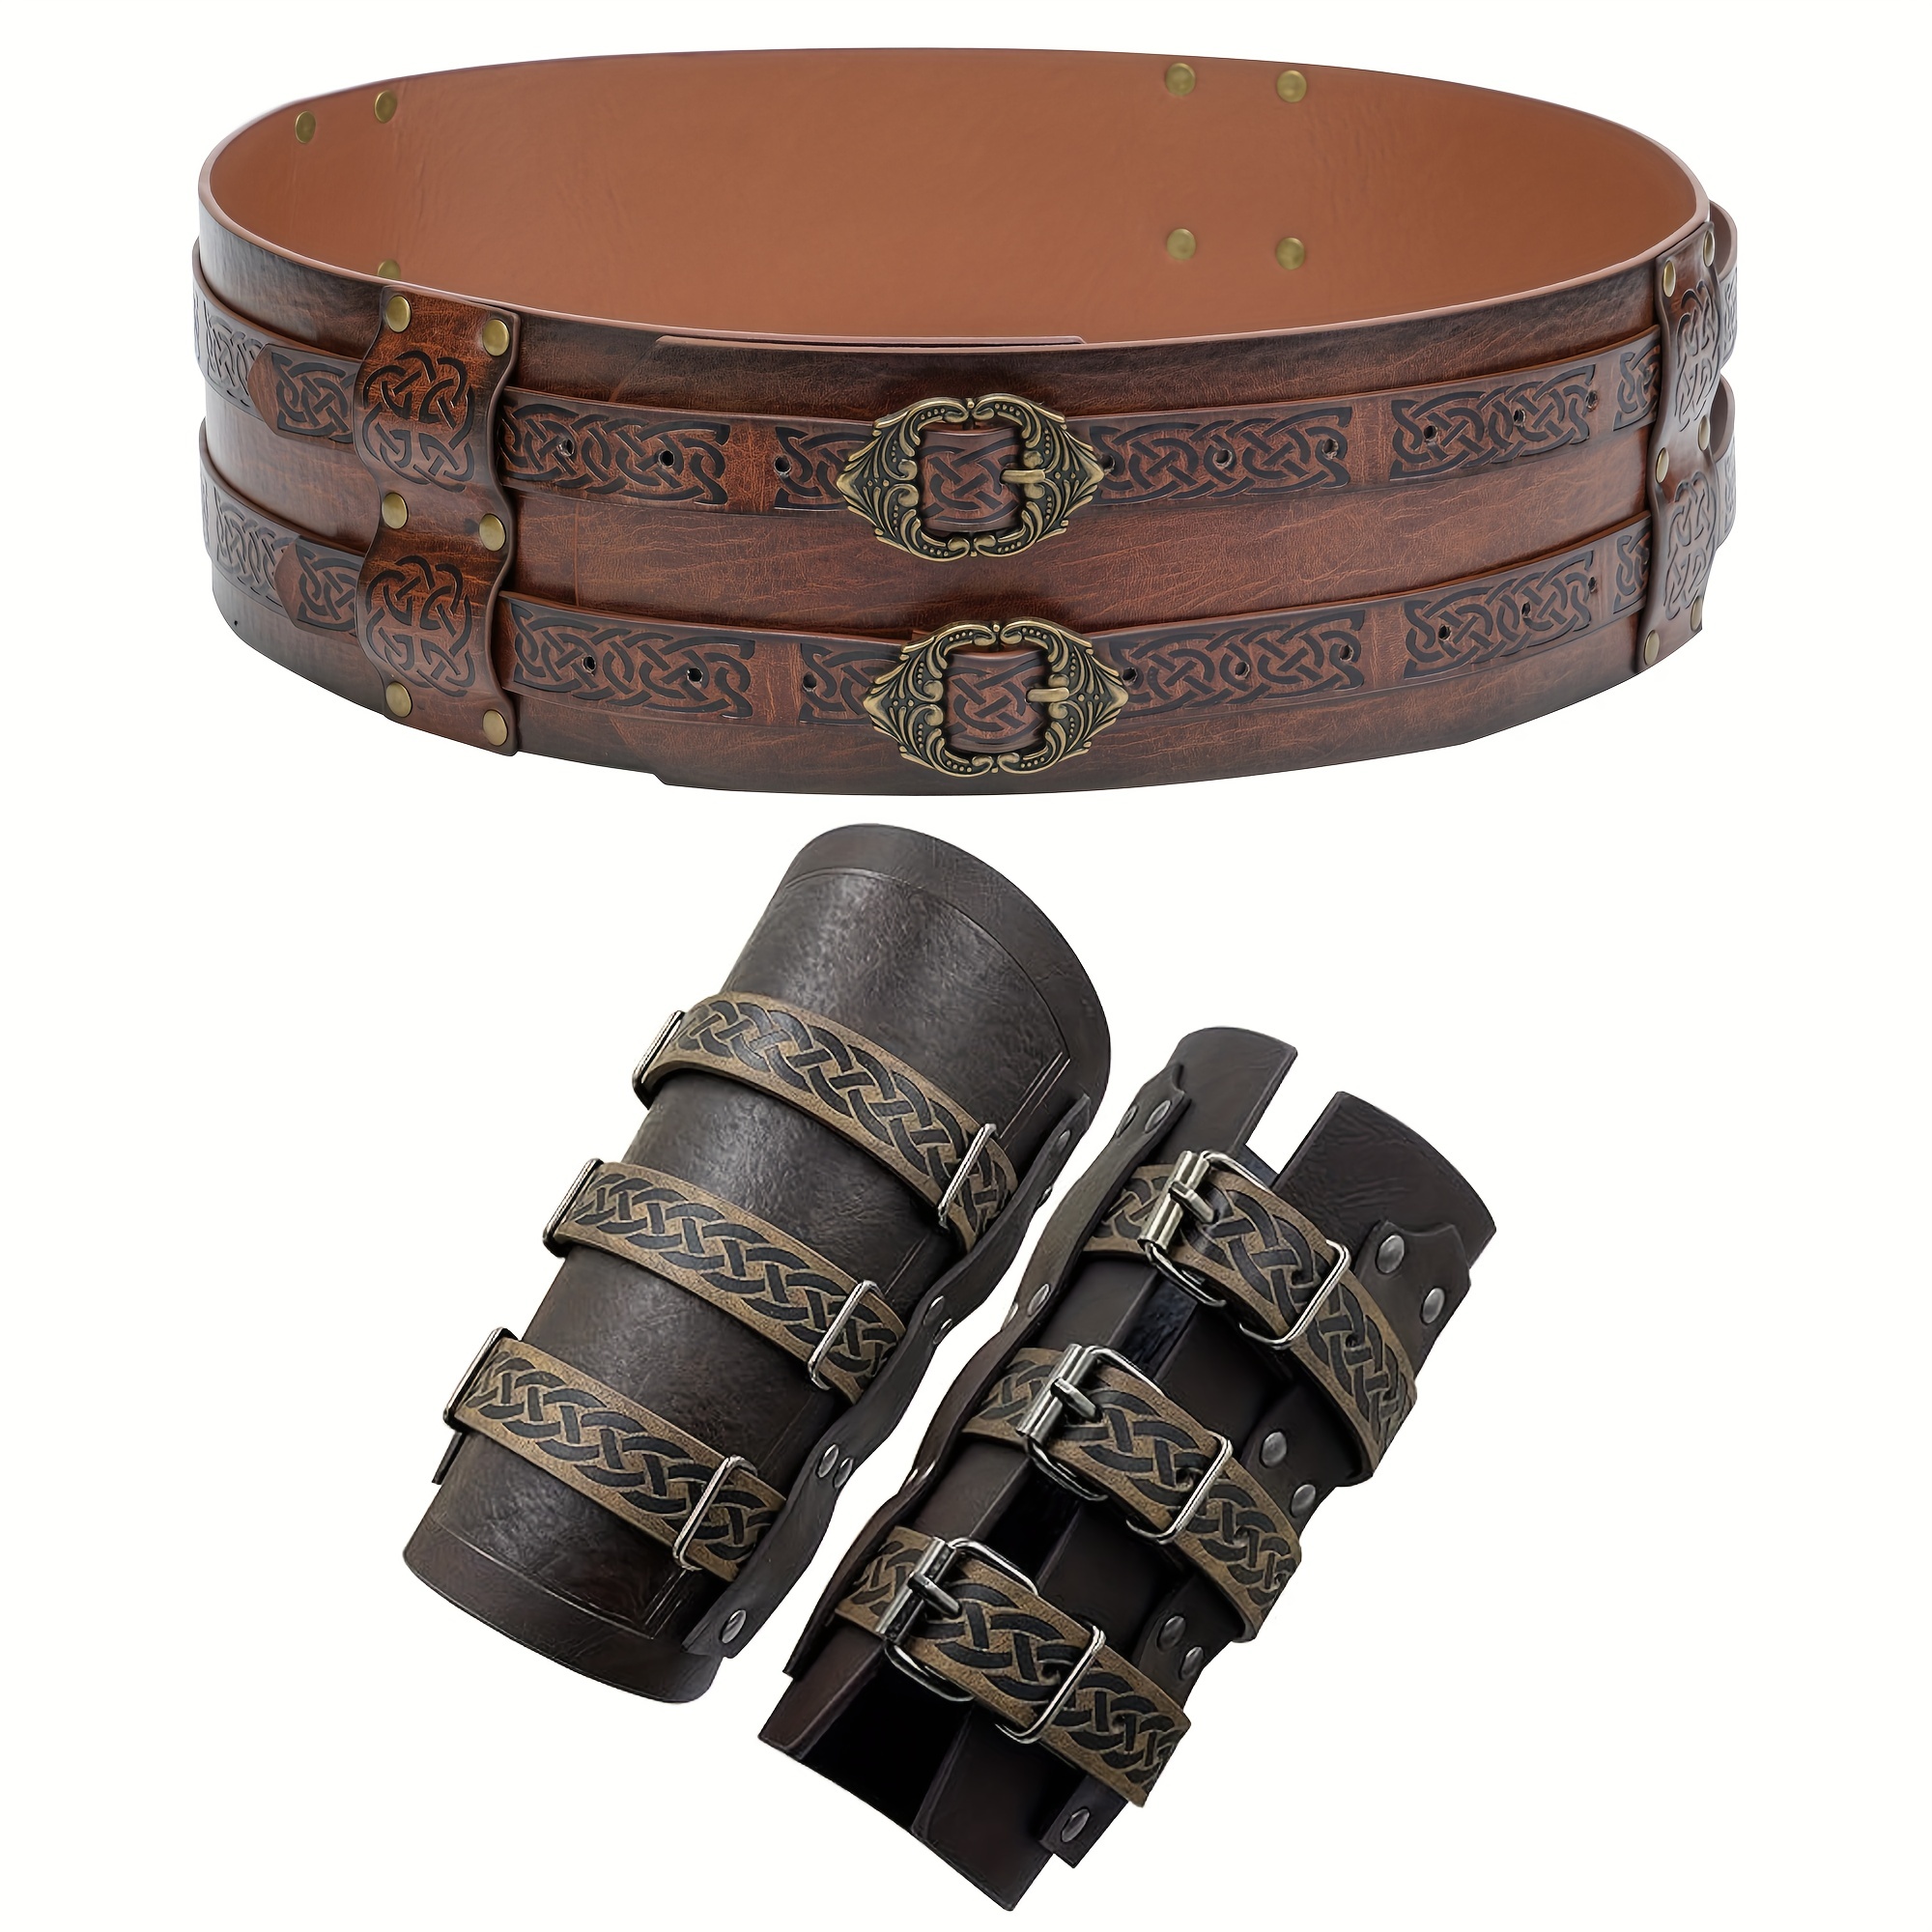  3 Pcs Faux Leather Arm Guards and Medieval Wide Belt